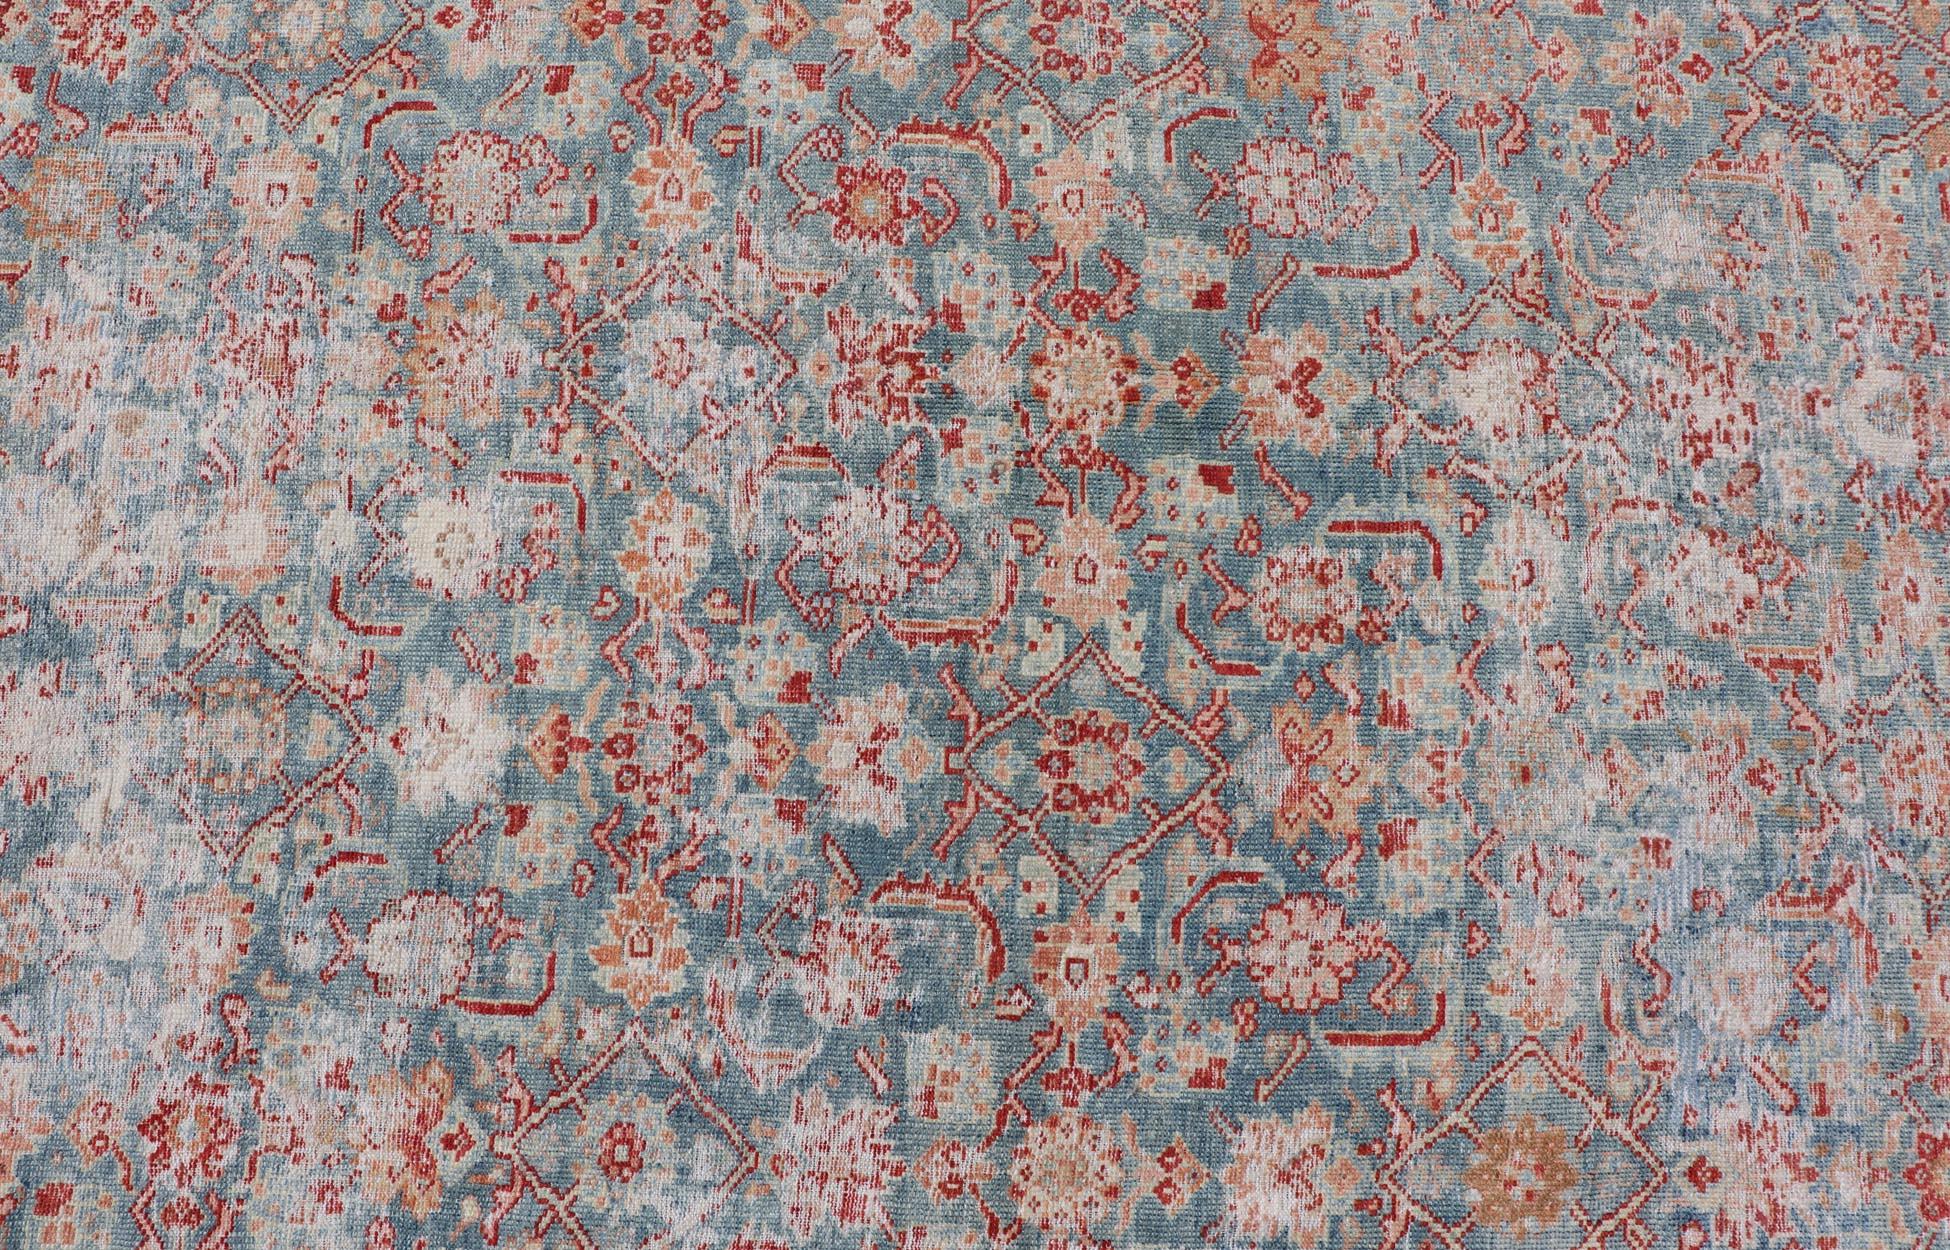 Antique Persian Malayer Gallery Rug with All over Design in Blue's and Red In Good Condition For Sale In Atlanta, GA